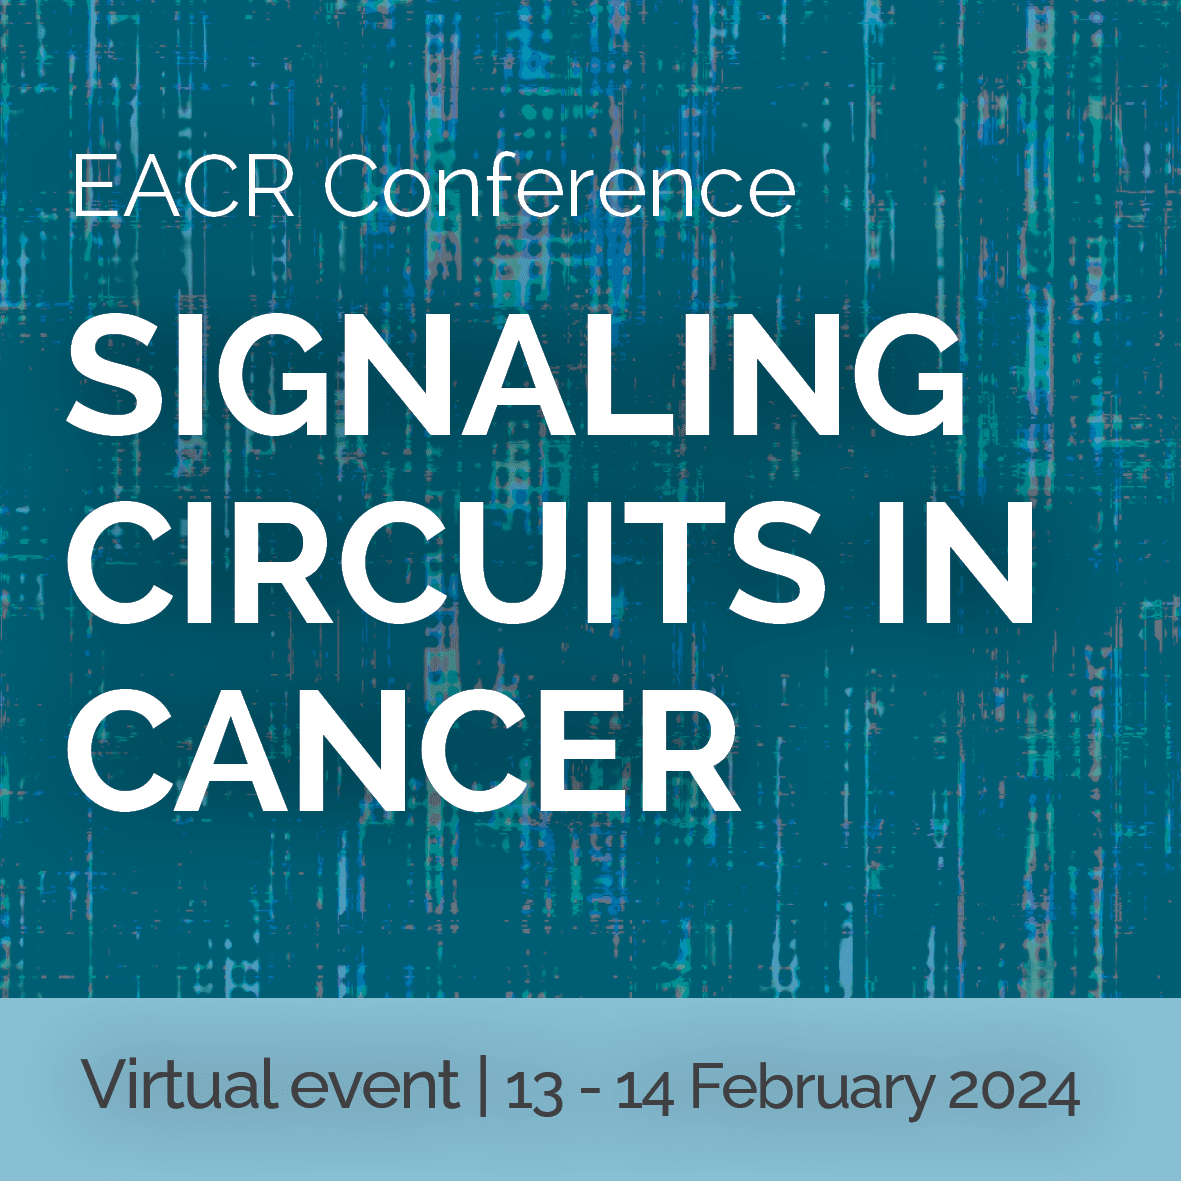 EACR Signaling Circuits in Cancer